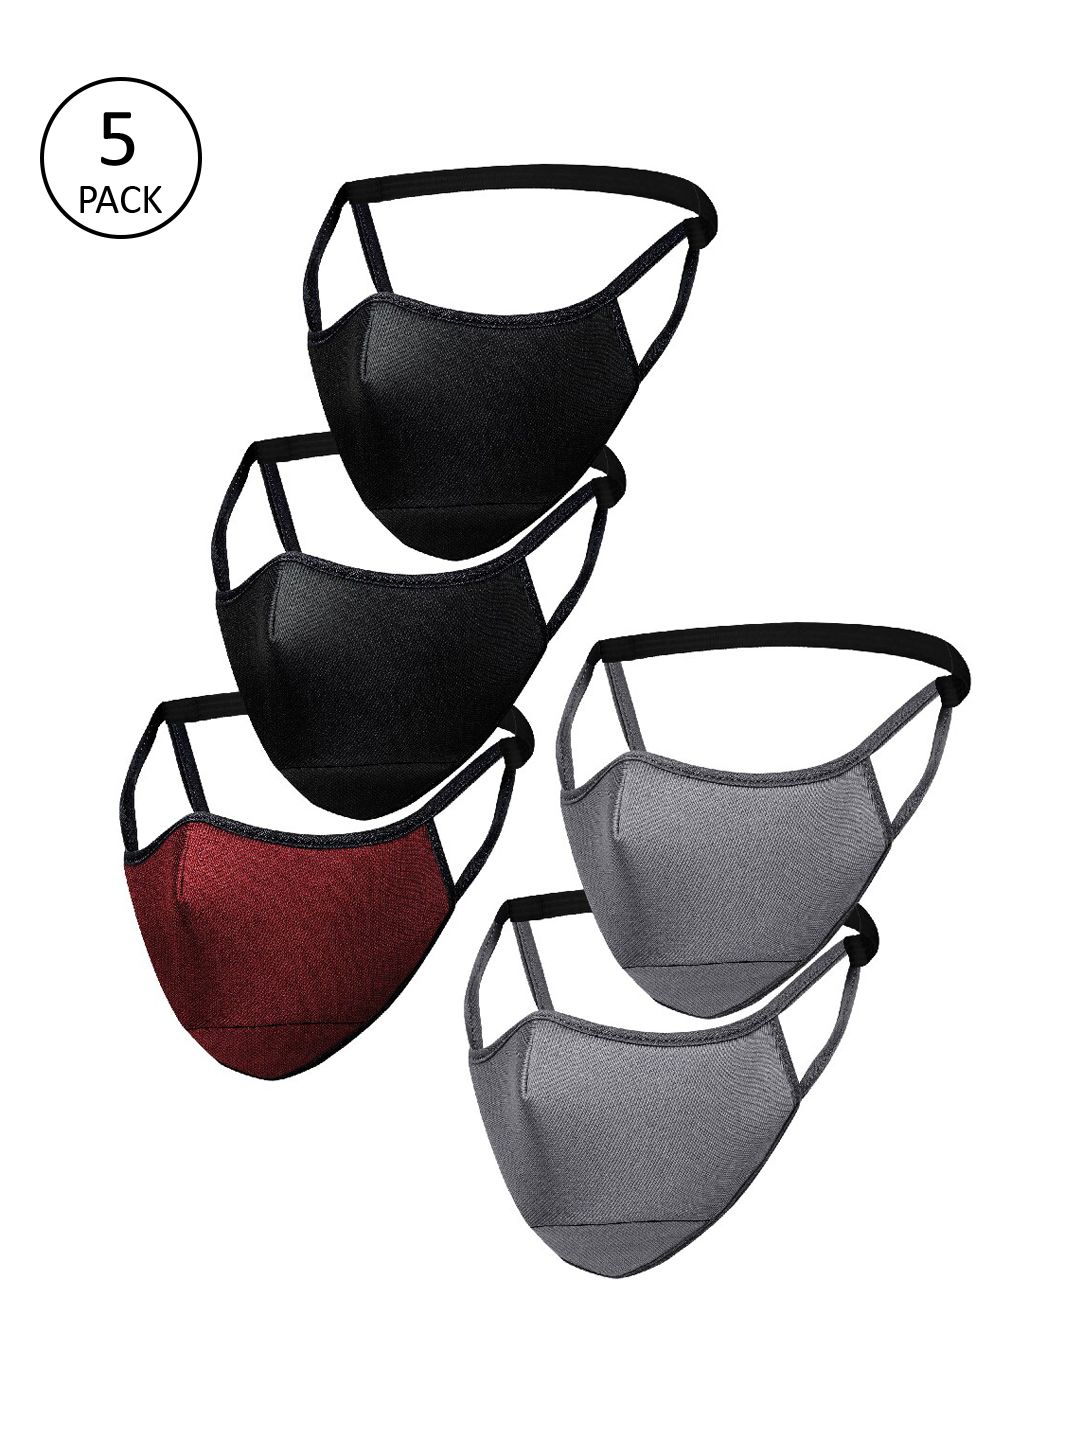 Impulse Unisex Multicoloured Pack Of 5 Reusable 4-Ply Cloth Masks Price in India